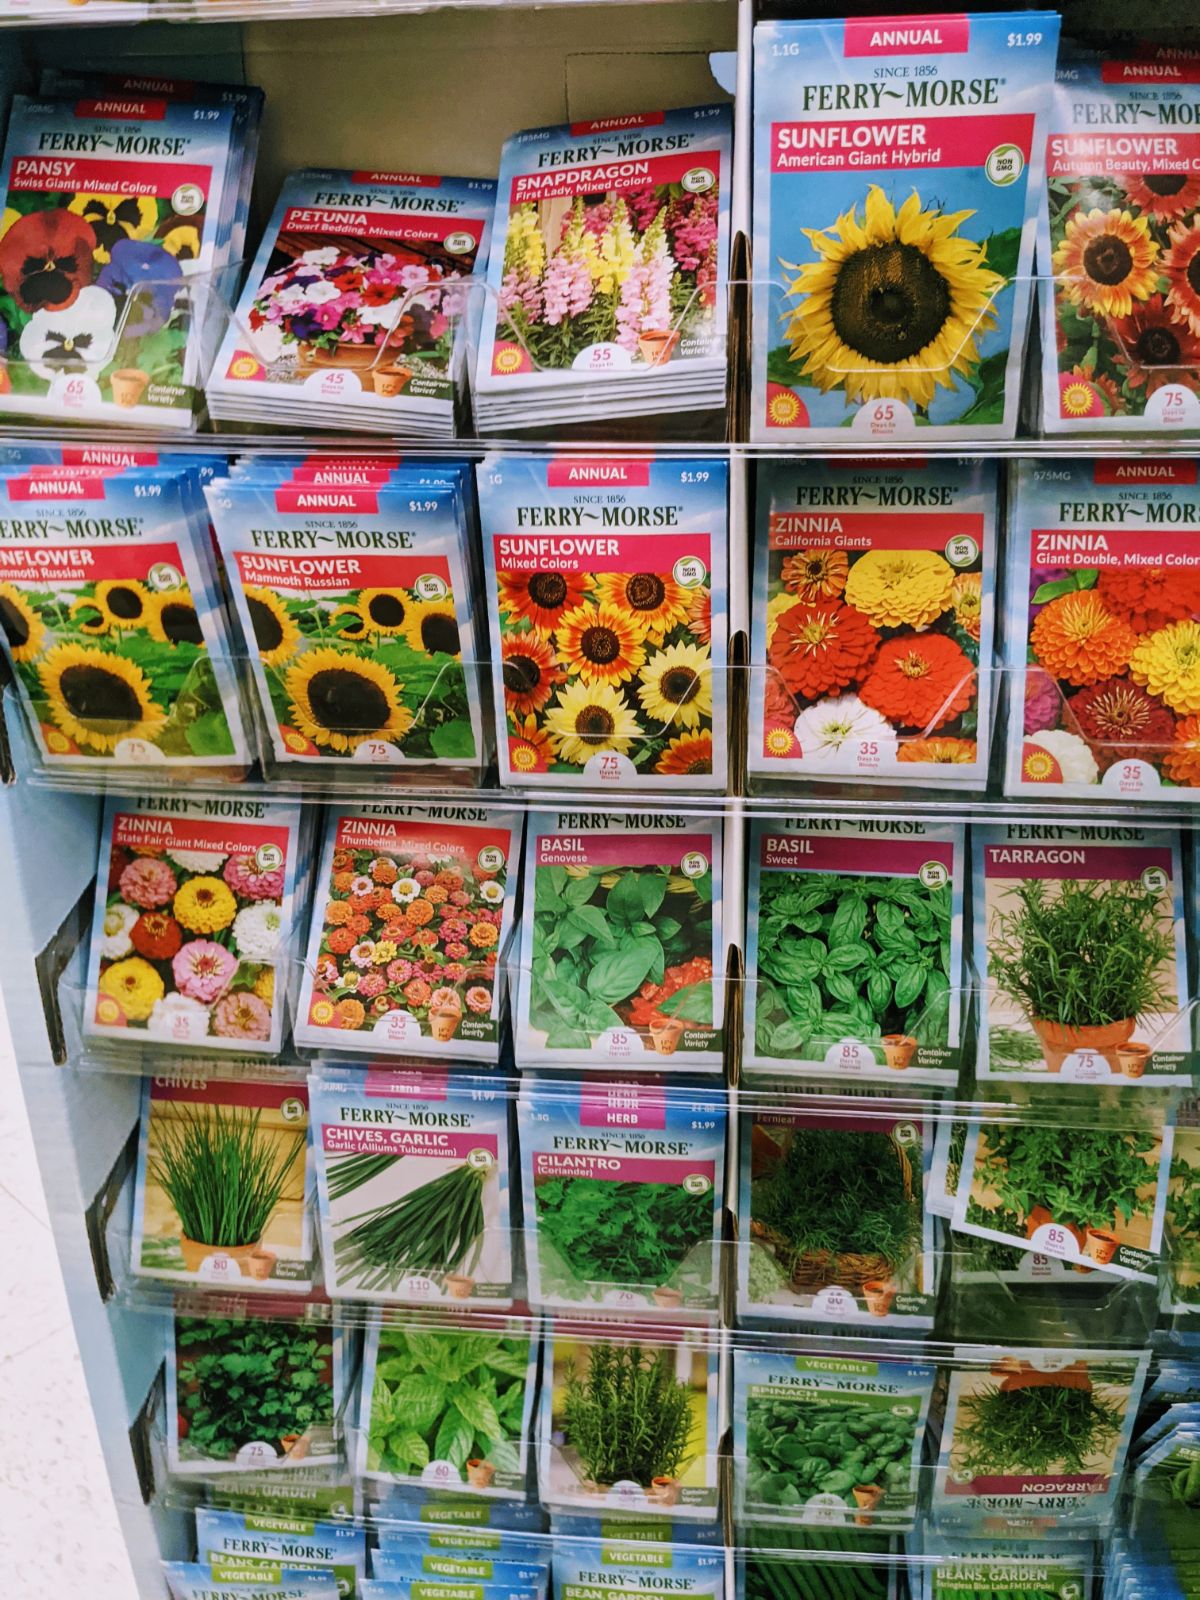 Rack of bright, colorful flower seeds like sunflowers and zinnias, with some green vegetables, available for sale at Tractor Supply